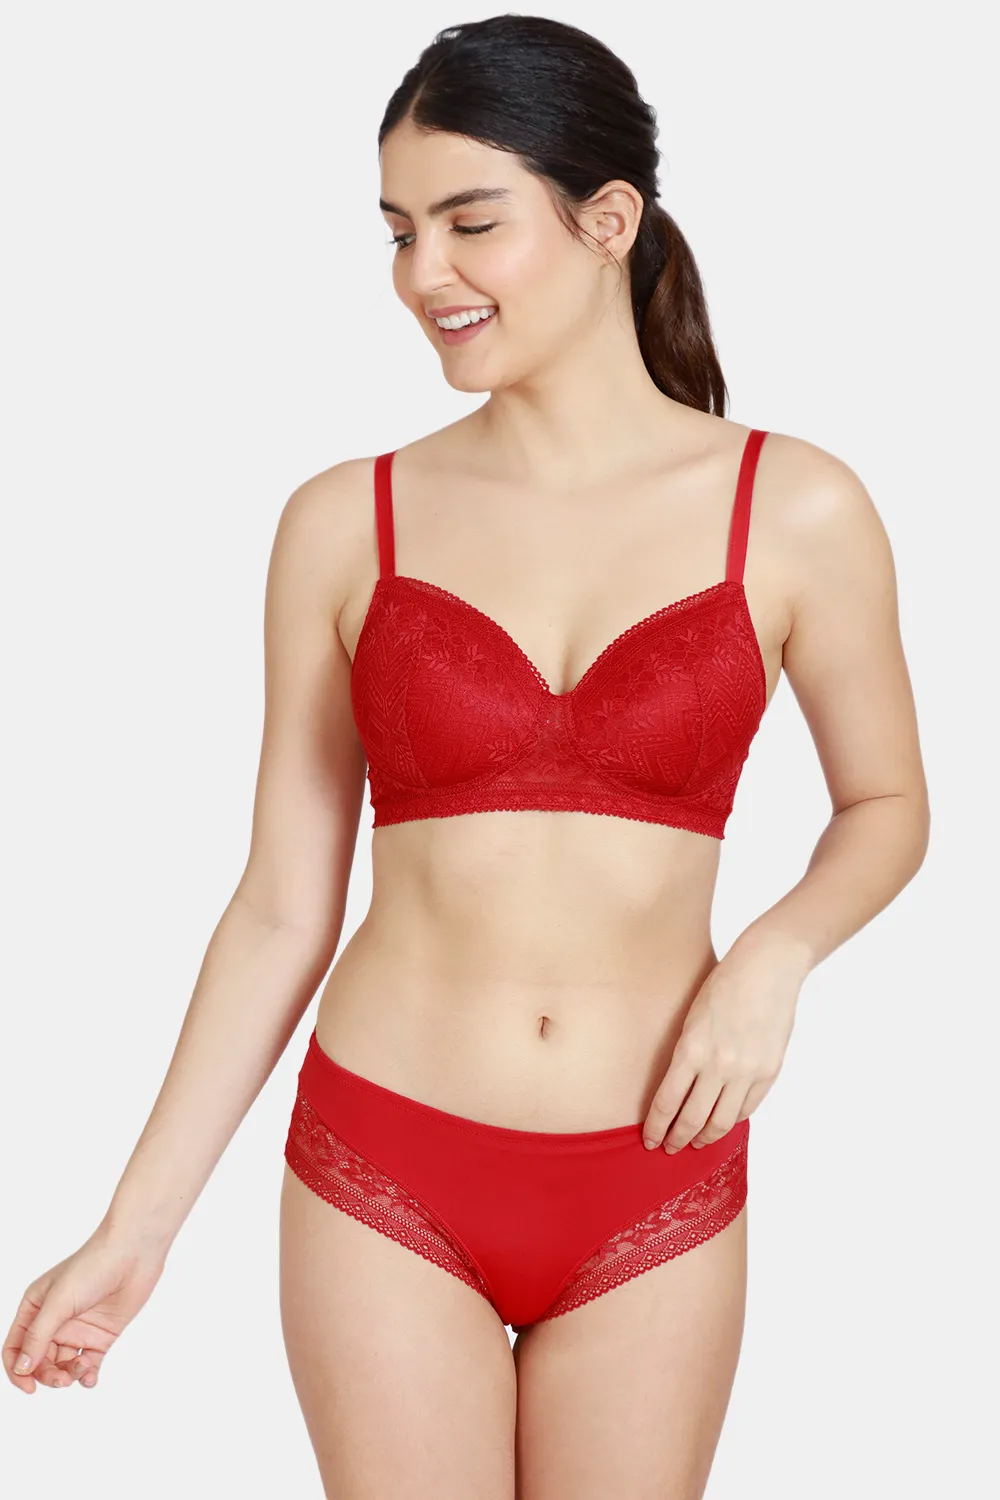 https://cdn.zivame.com/ik-seo/media/catalog/product/1/_/1_22_12/zivame-love-stories-padded-non-wired-3-4th-coverage-lace-bra-with-mid-rise-panty-chilli-pepper.jpg